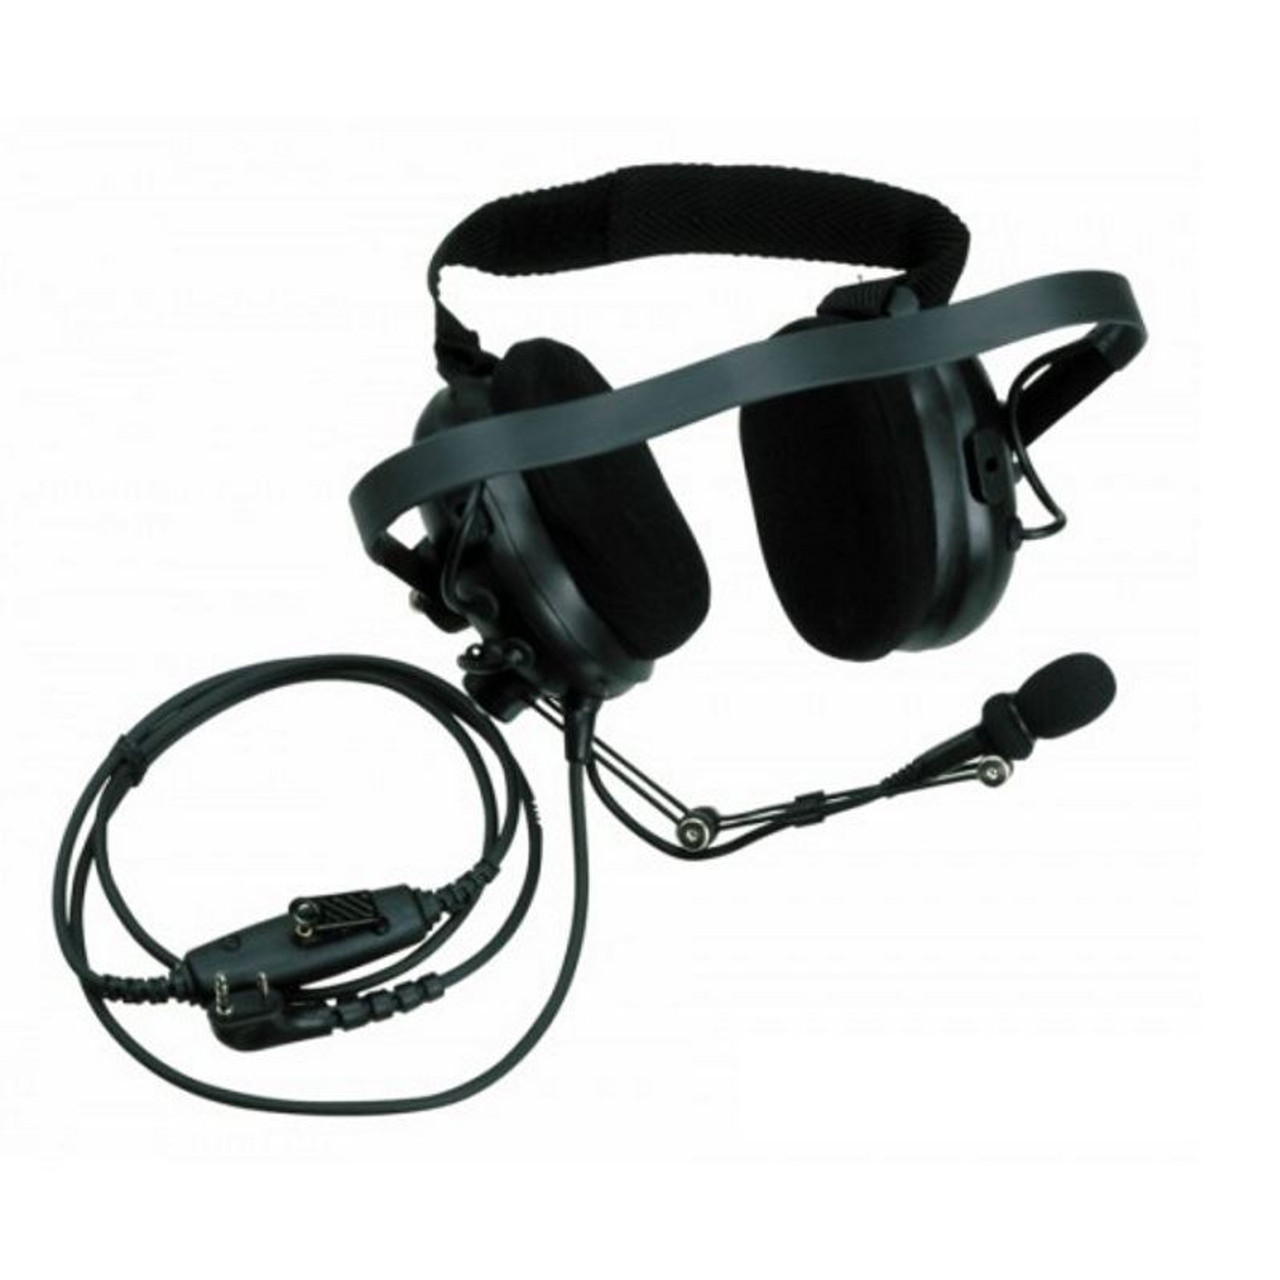 Kenwood KHS-10-BH is a heavy-duty behind the head dual muff headset that is  perfect for very noisy environments an adjustable headband, flexible boom  Mic and an in-line push-to-talk. Built in Noise Reduction,